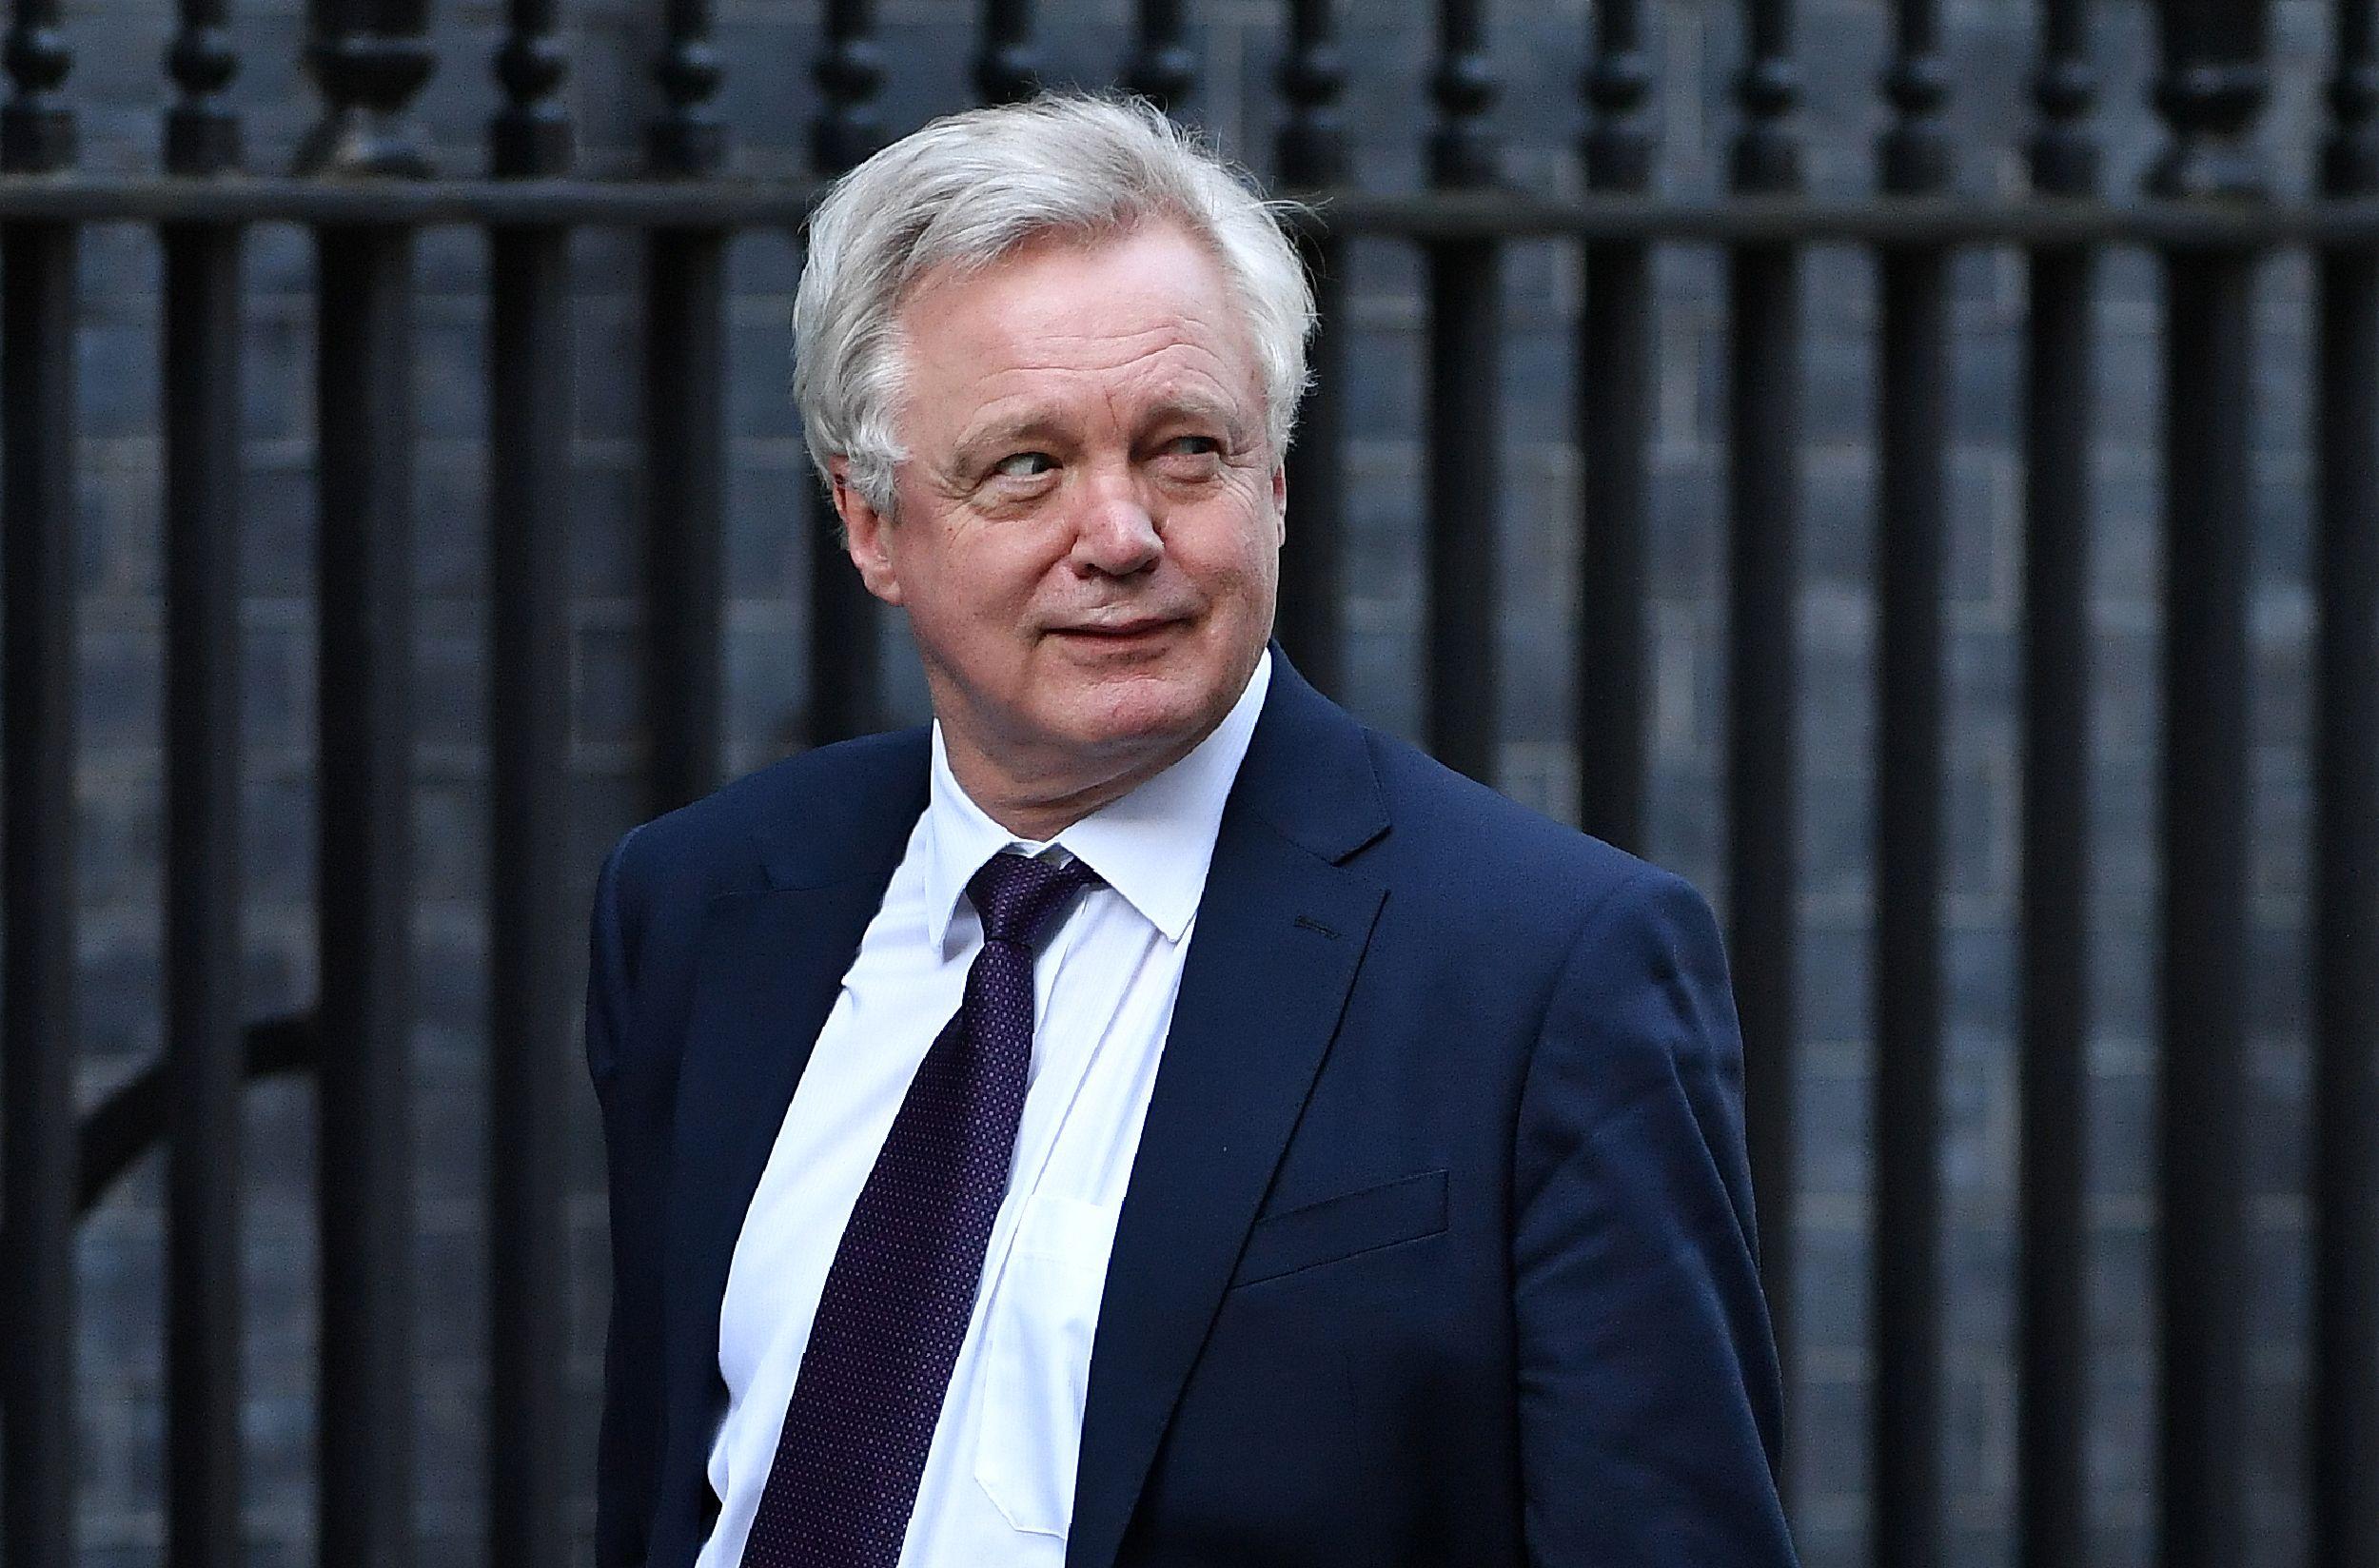 David Davis has backtracked on the Government’s threat of withdrawing security cooperation with Europe